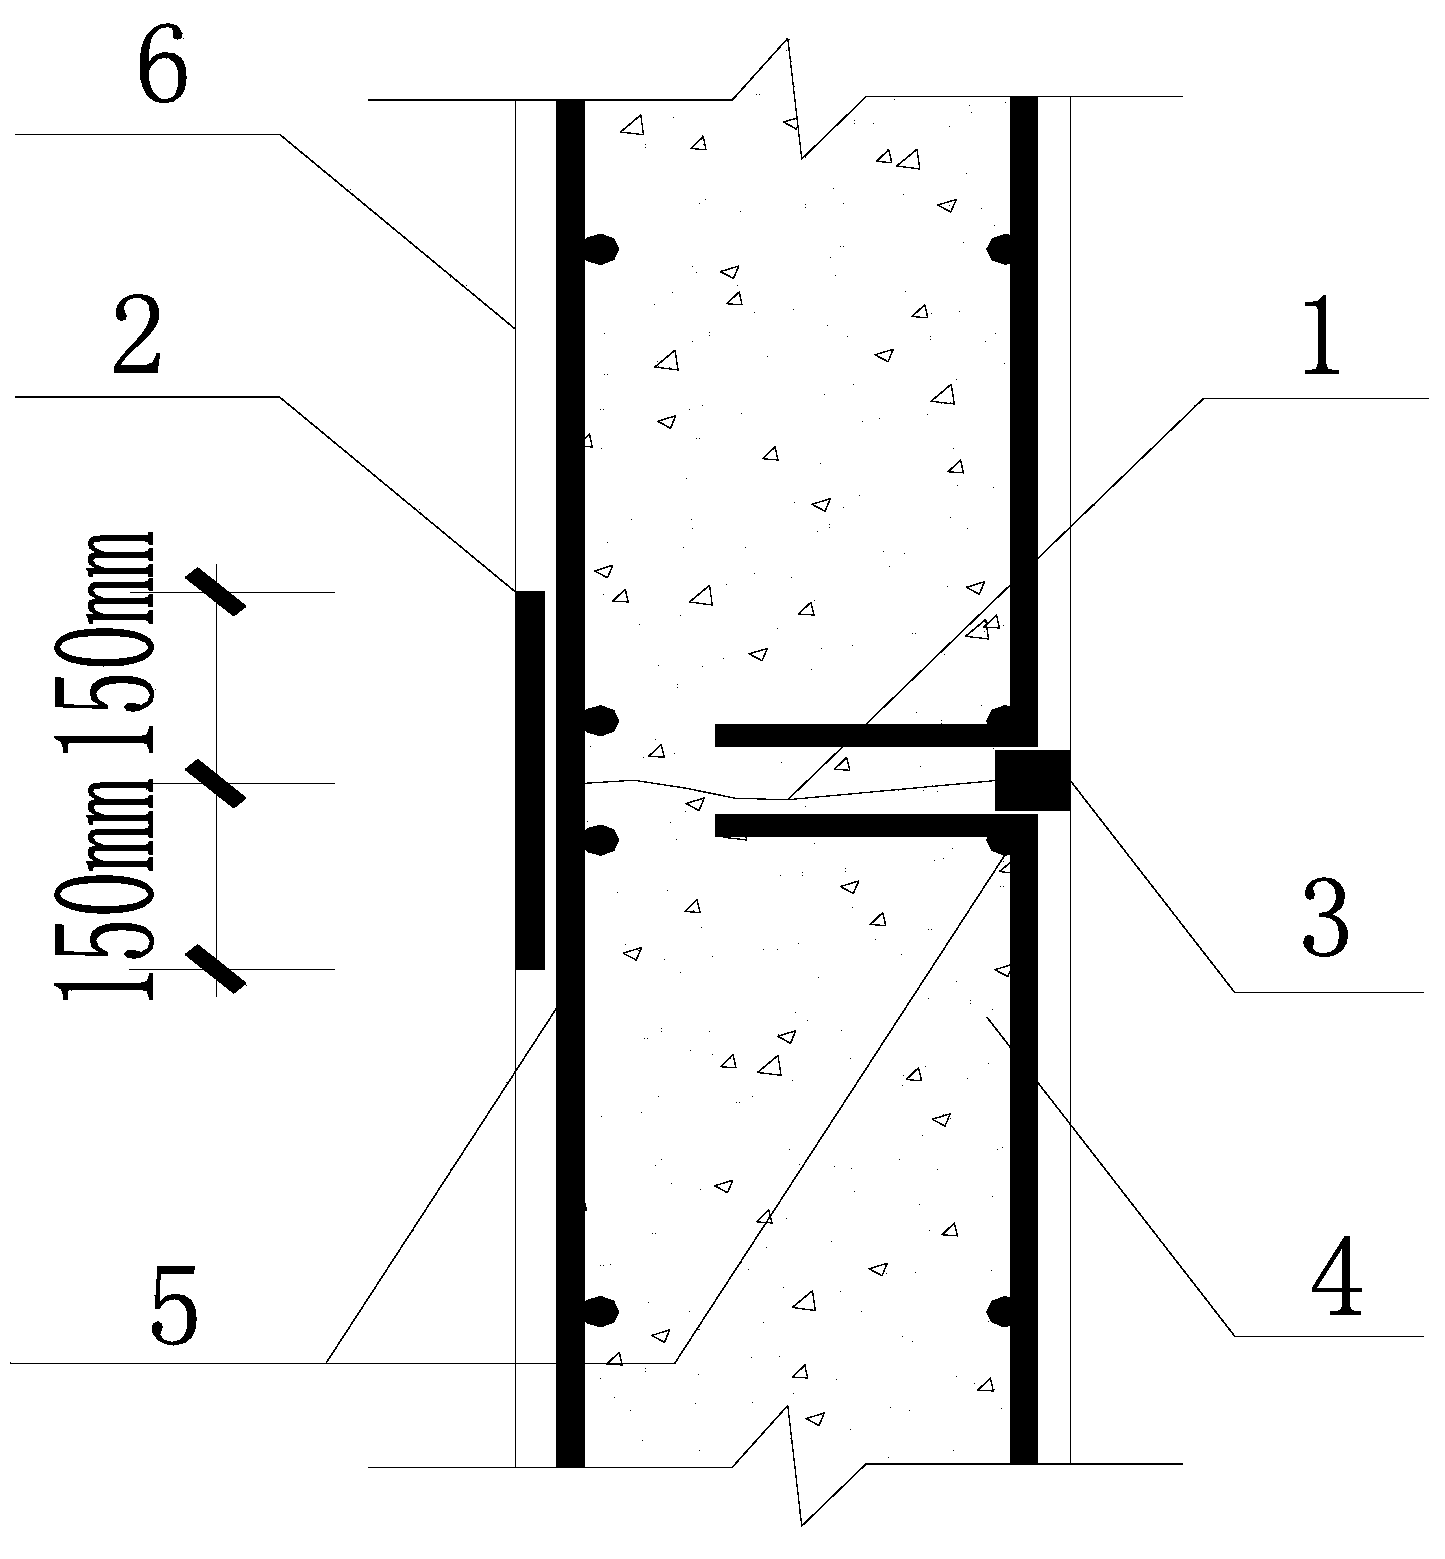 Underground structure crack control construction method by adding inducing joints